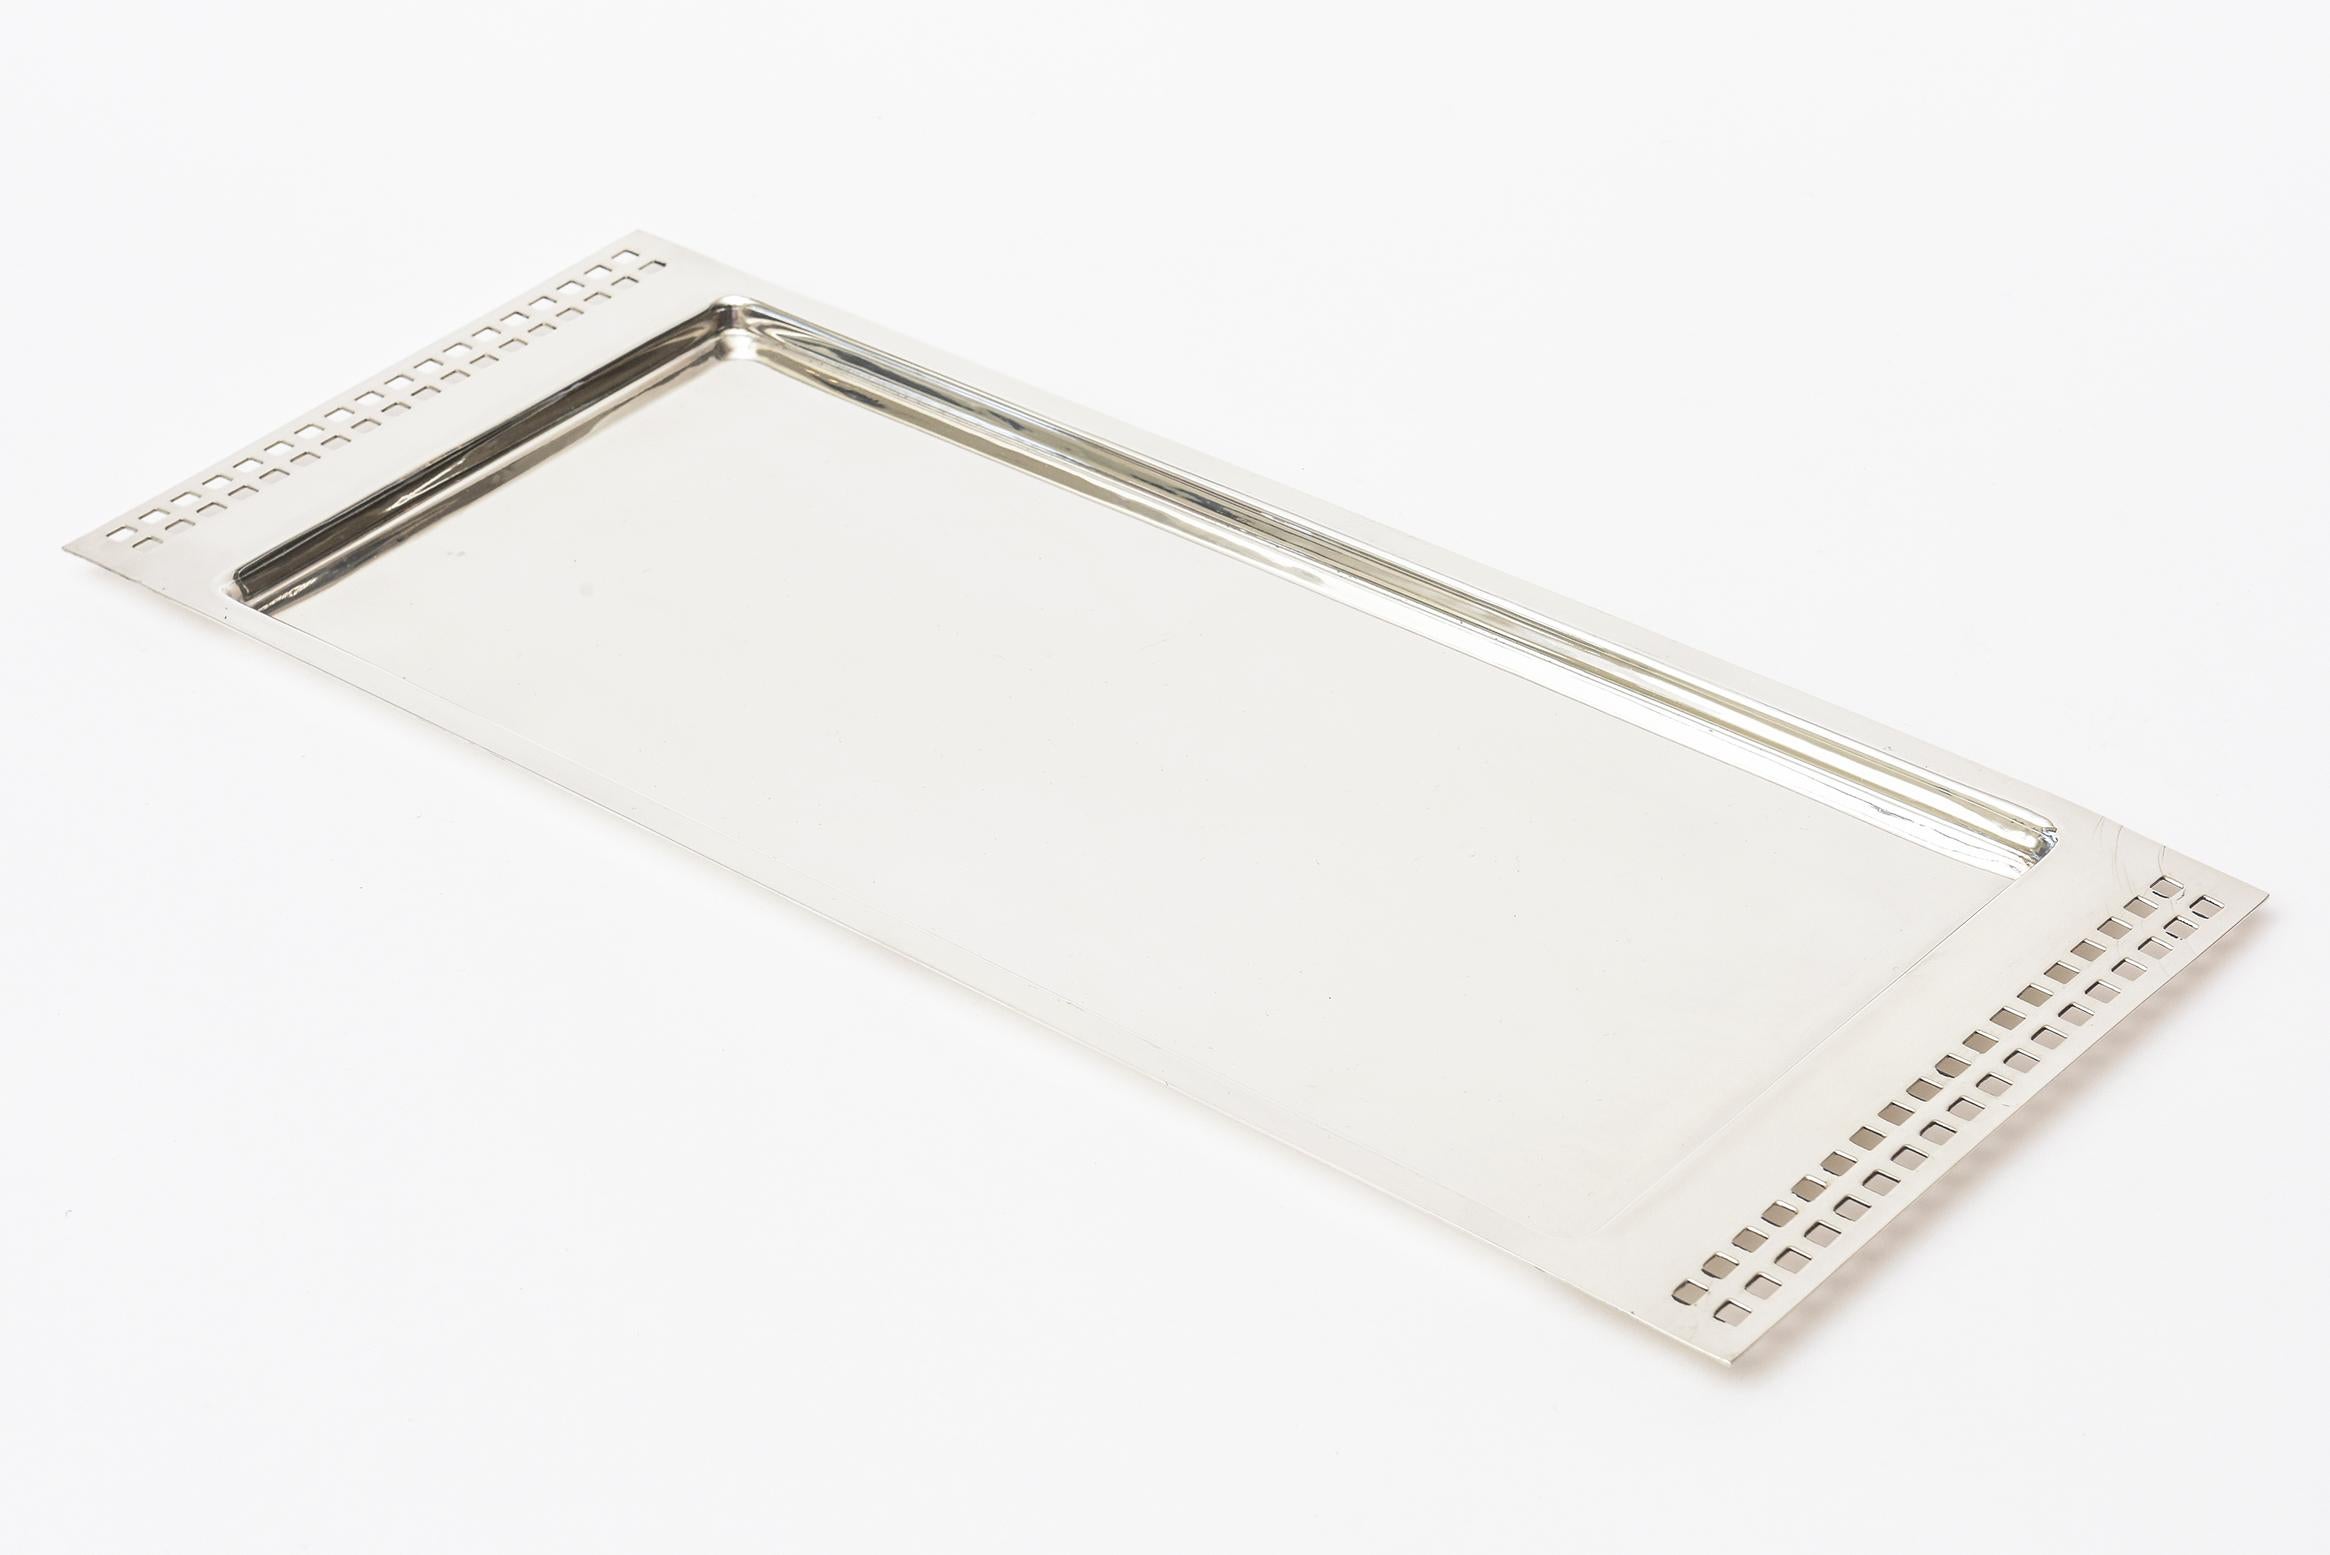 This fabulous elegonated rectangular silver plate tray and or serving tray by an artist for Swid Powell is signed but not terribly legible. It is the skyscraper tray from the 1980s. It is also a great desk accessory and or barware. It is marked on